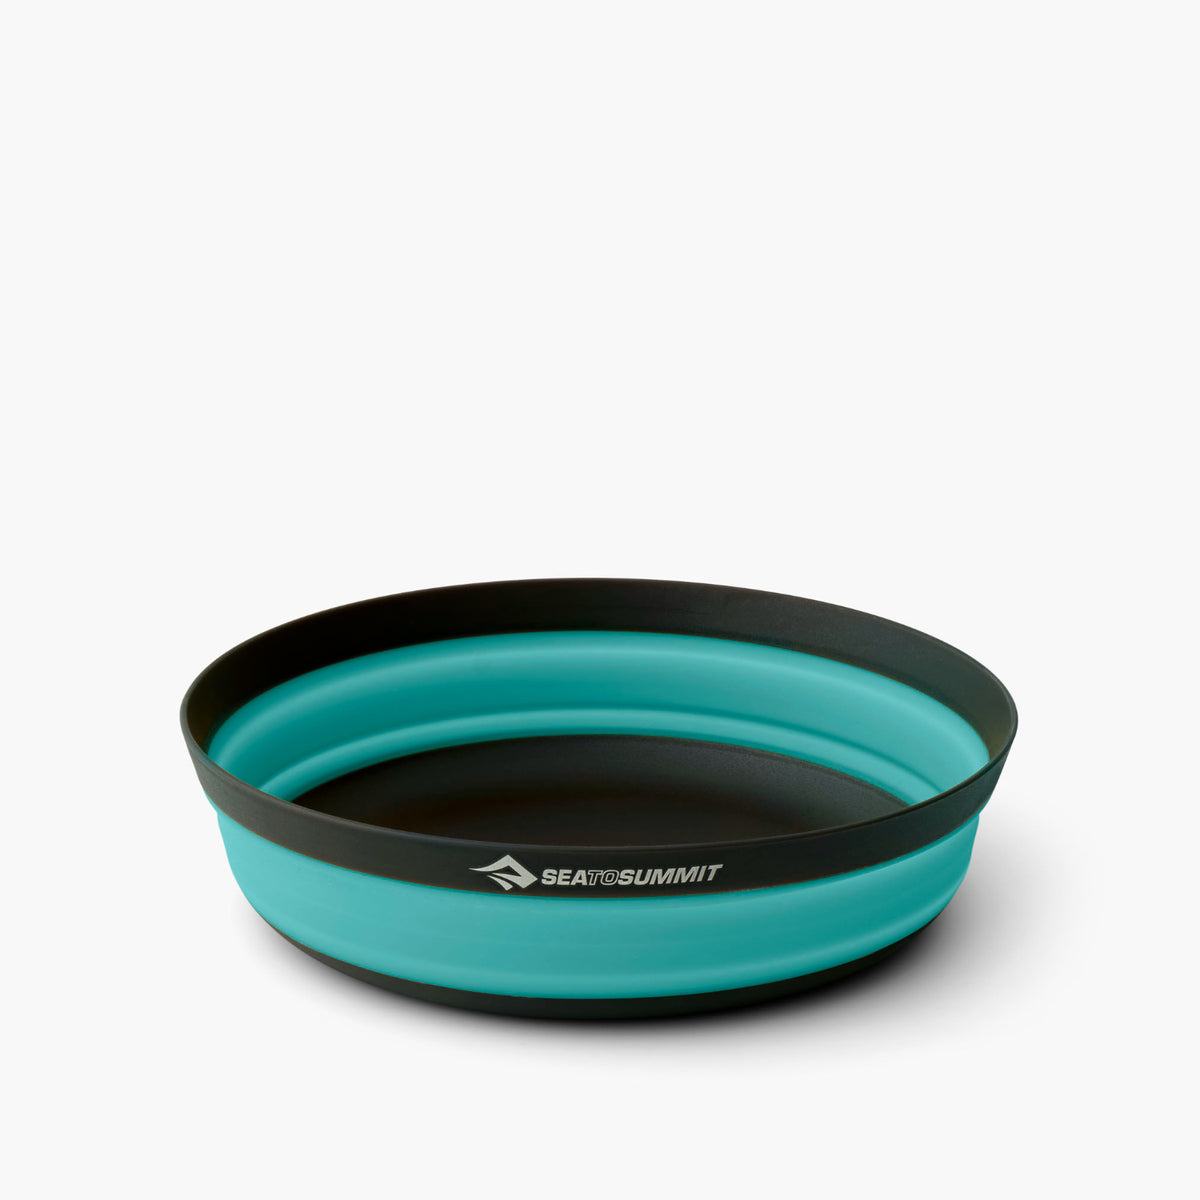 Sea to Summit Frontier Collapsible Bowl - Large in aqua sea blue